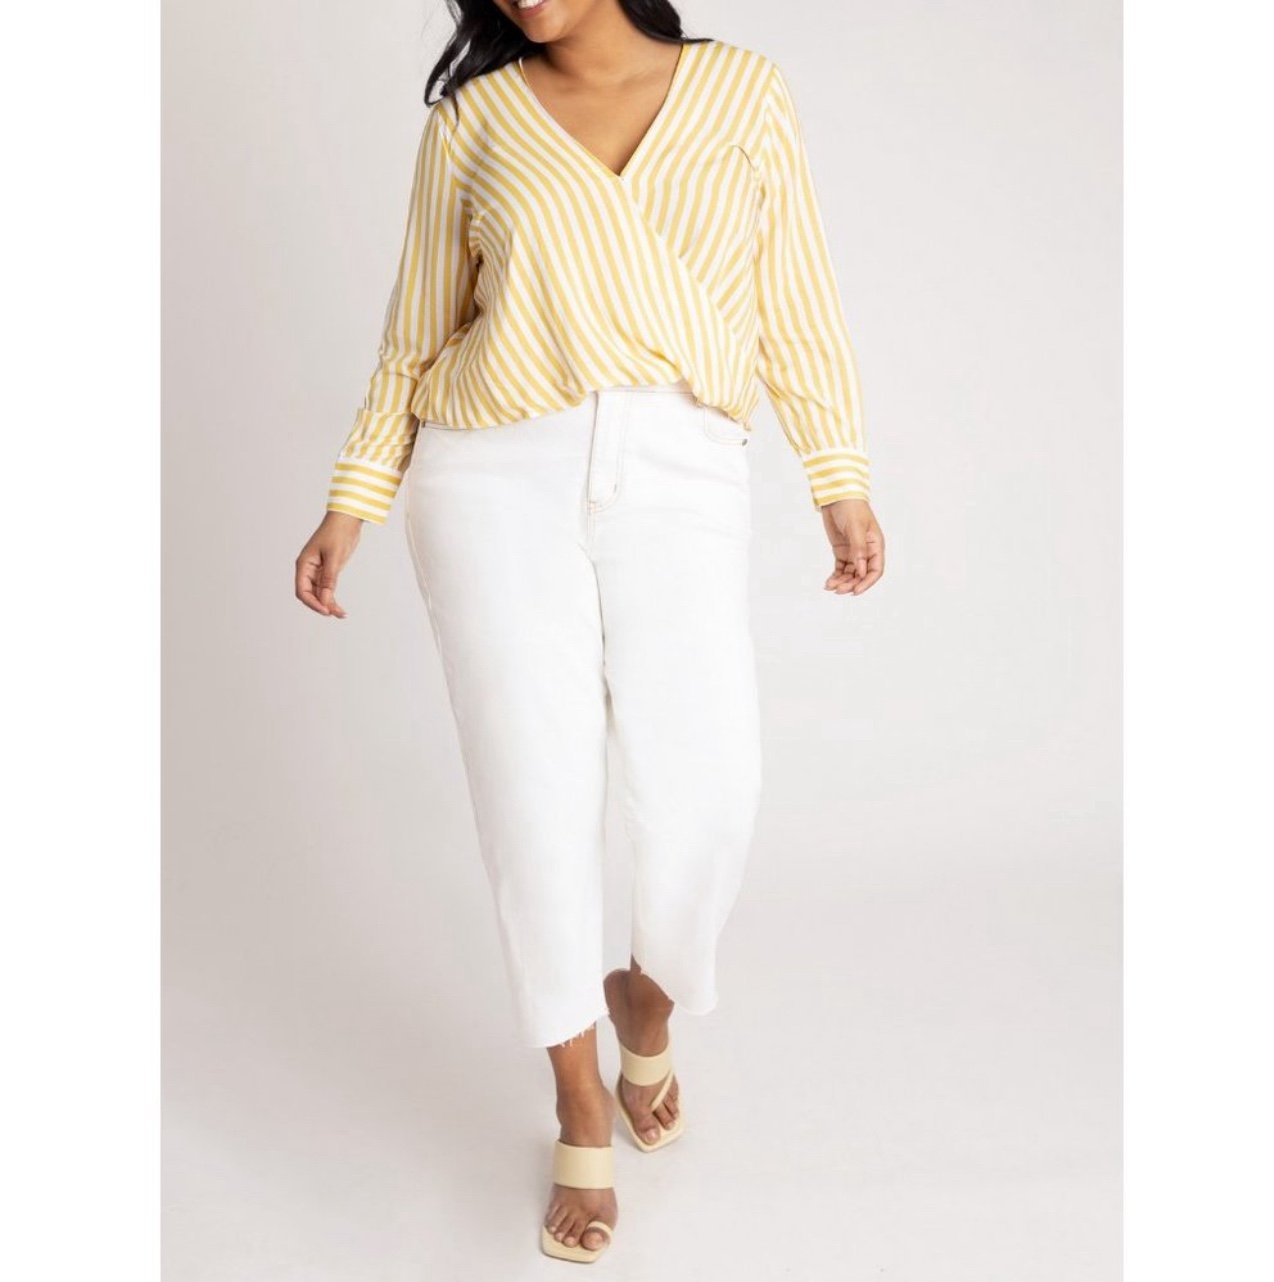 Special offer  NEW Eloquii Yellow Striped Crossover Blouse Top MMkFWXmls Great